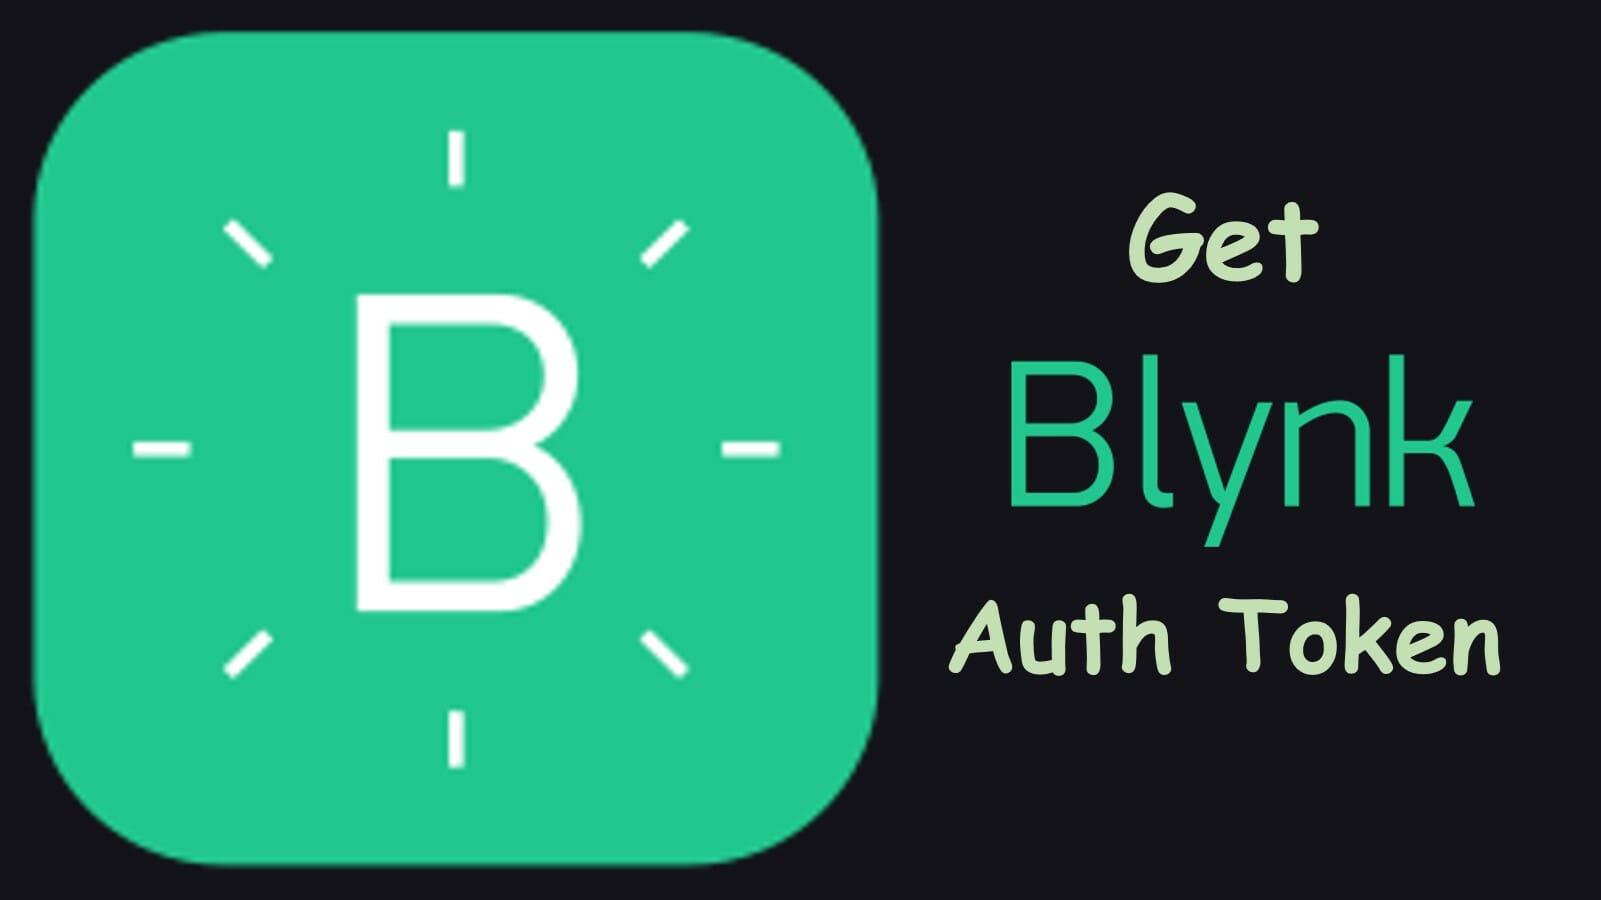 How to get Auth Token from Blynk